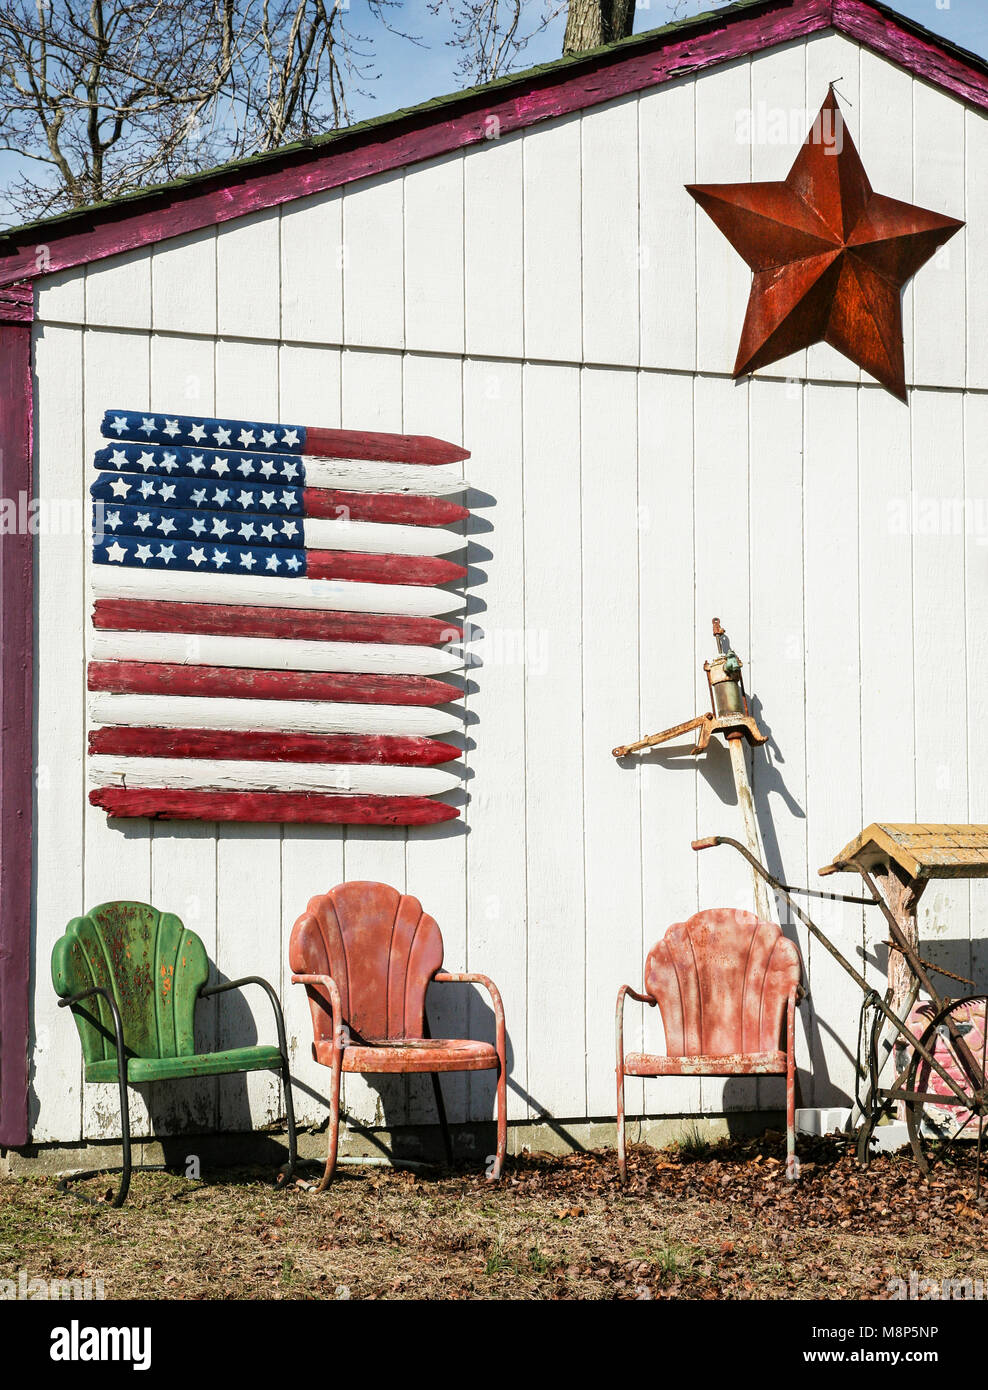 Wooden Flag and vintage metal chairs, vintage garden furniture, near Hammonton, New Jersey, USA, farm building vertical farming tool shed Stock Photo